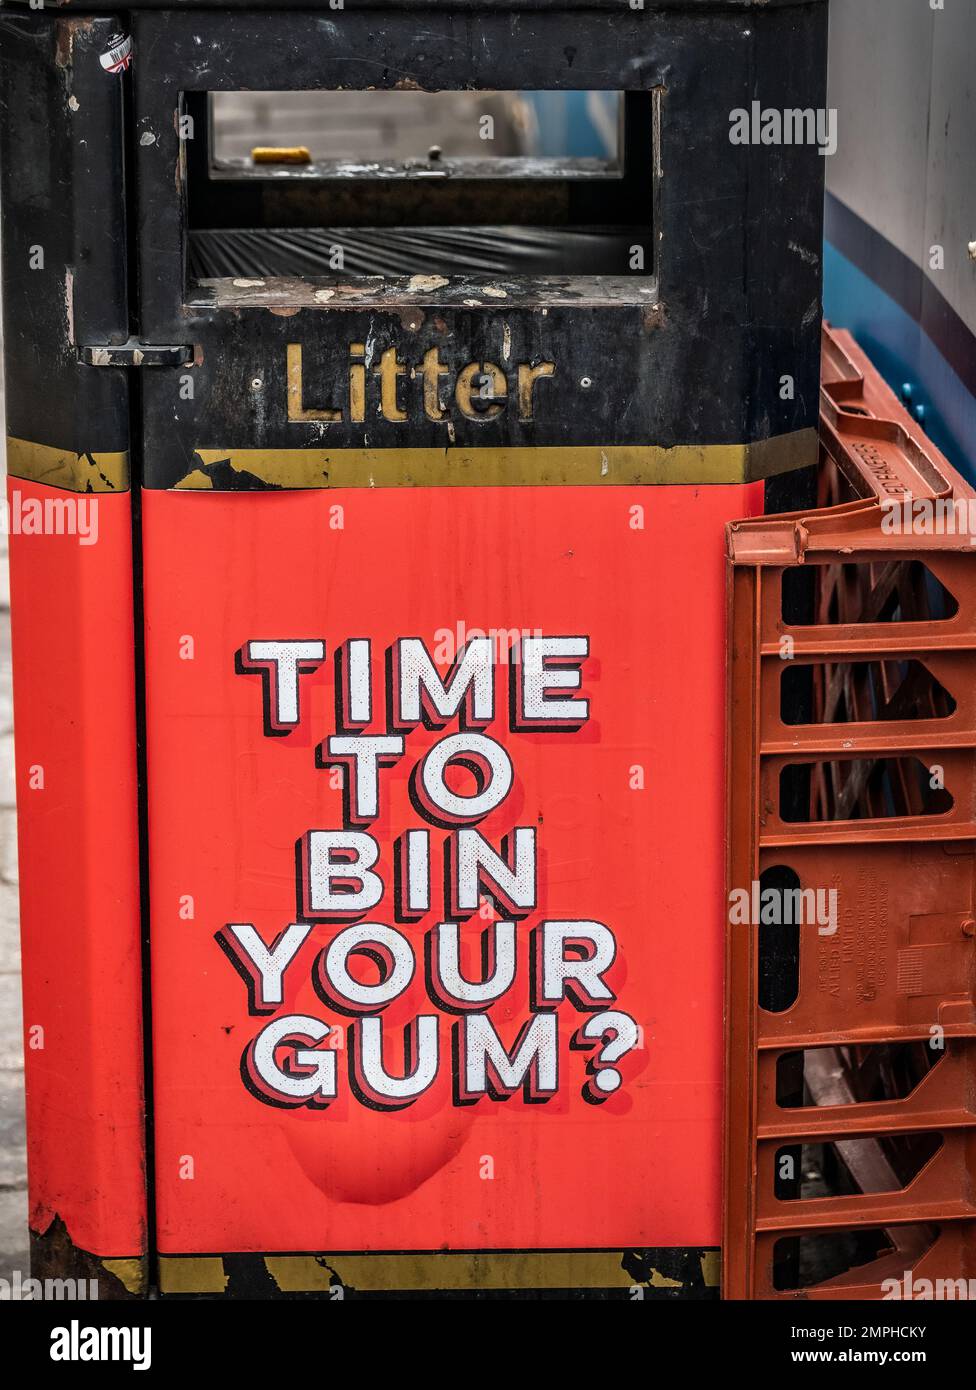 Waste Bin in Central London with Time To Bin Your Gum? displayed on the side of the bin Stock Photo